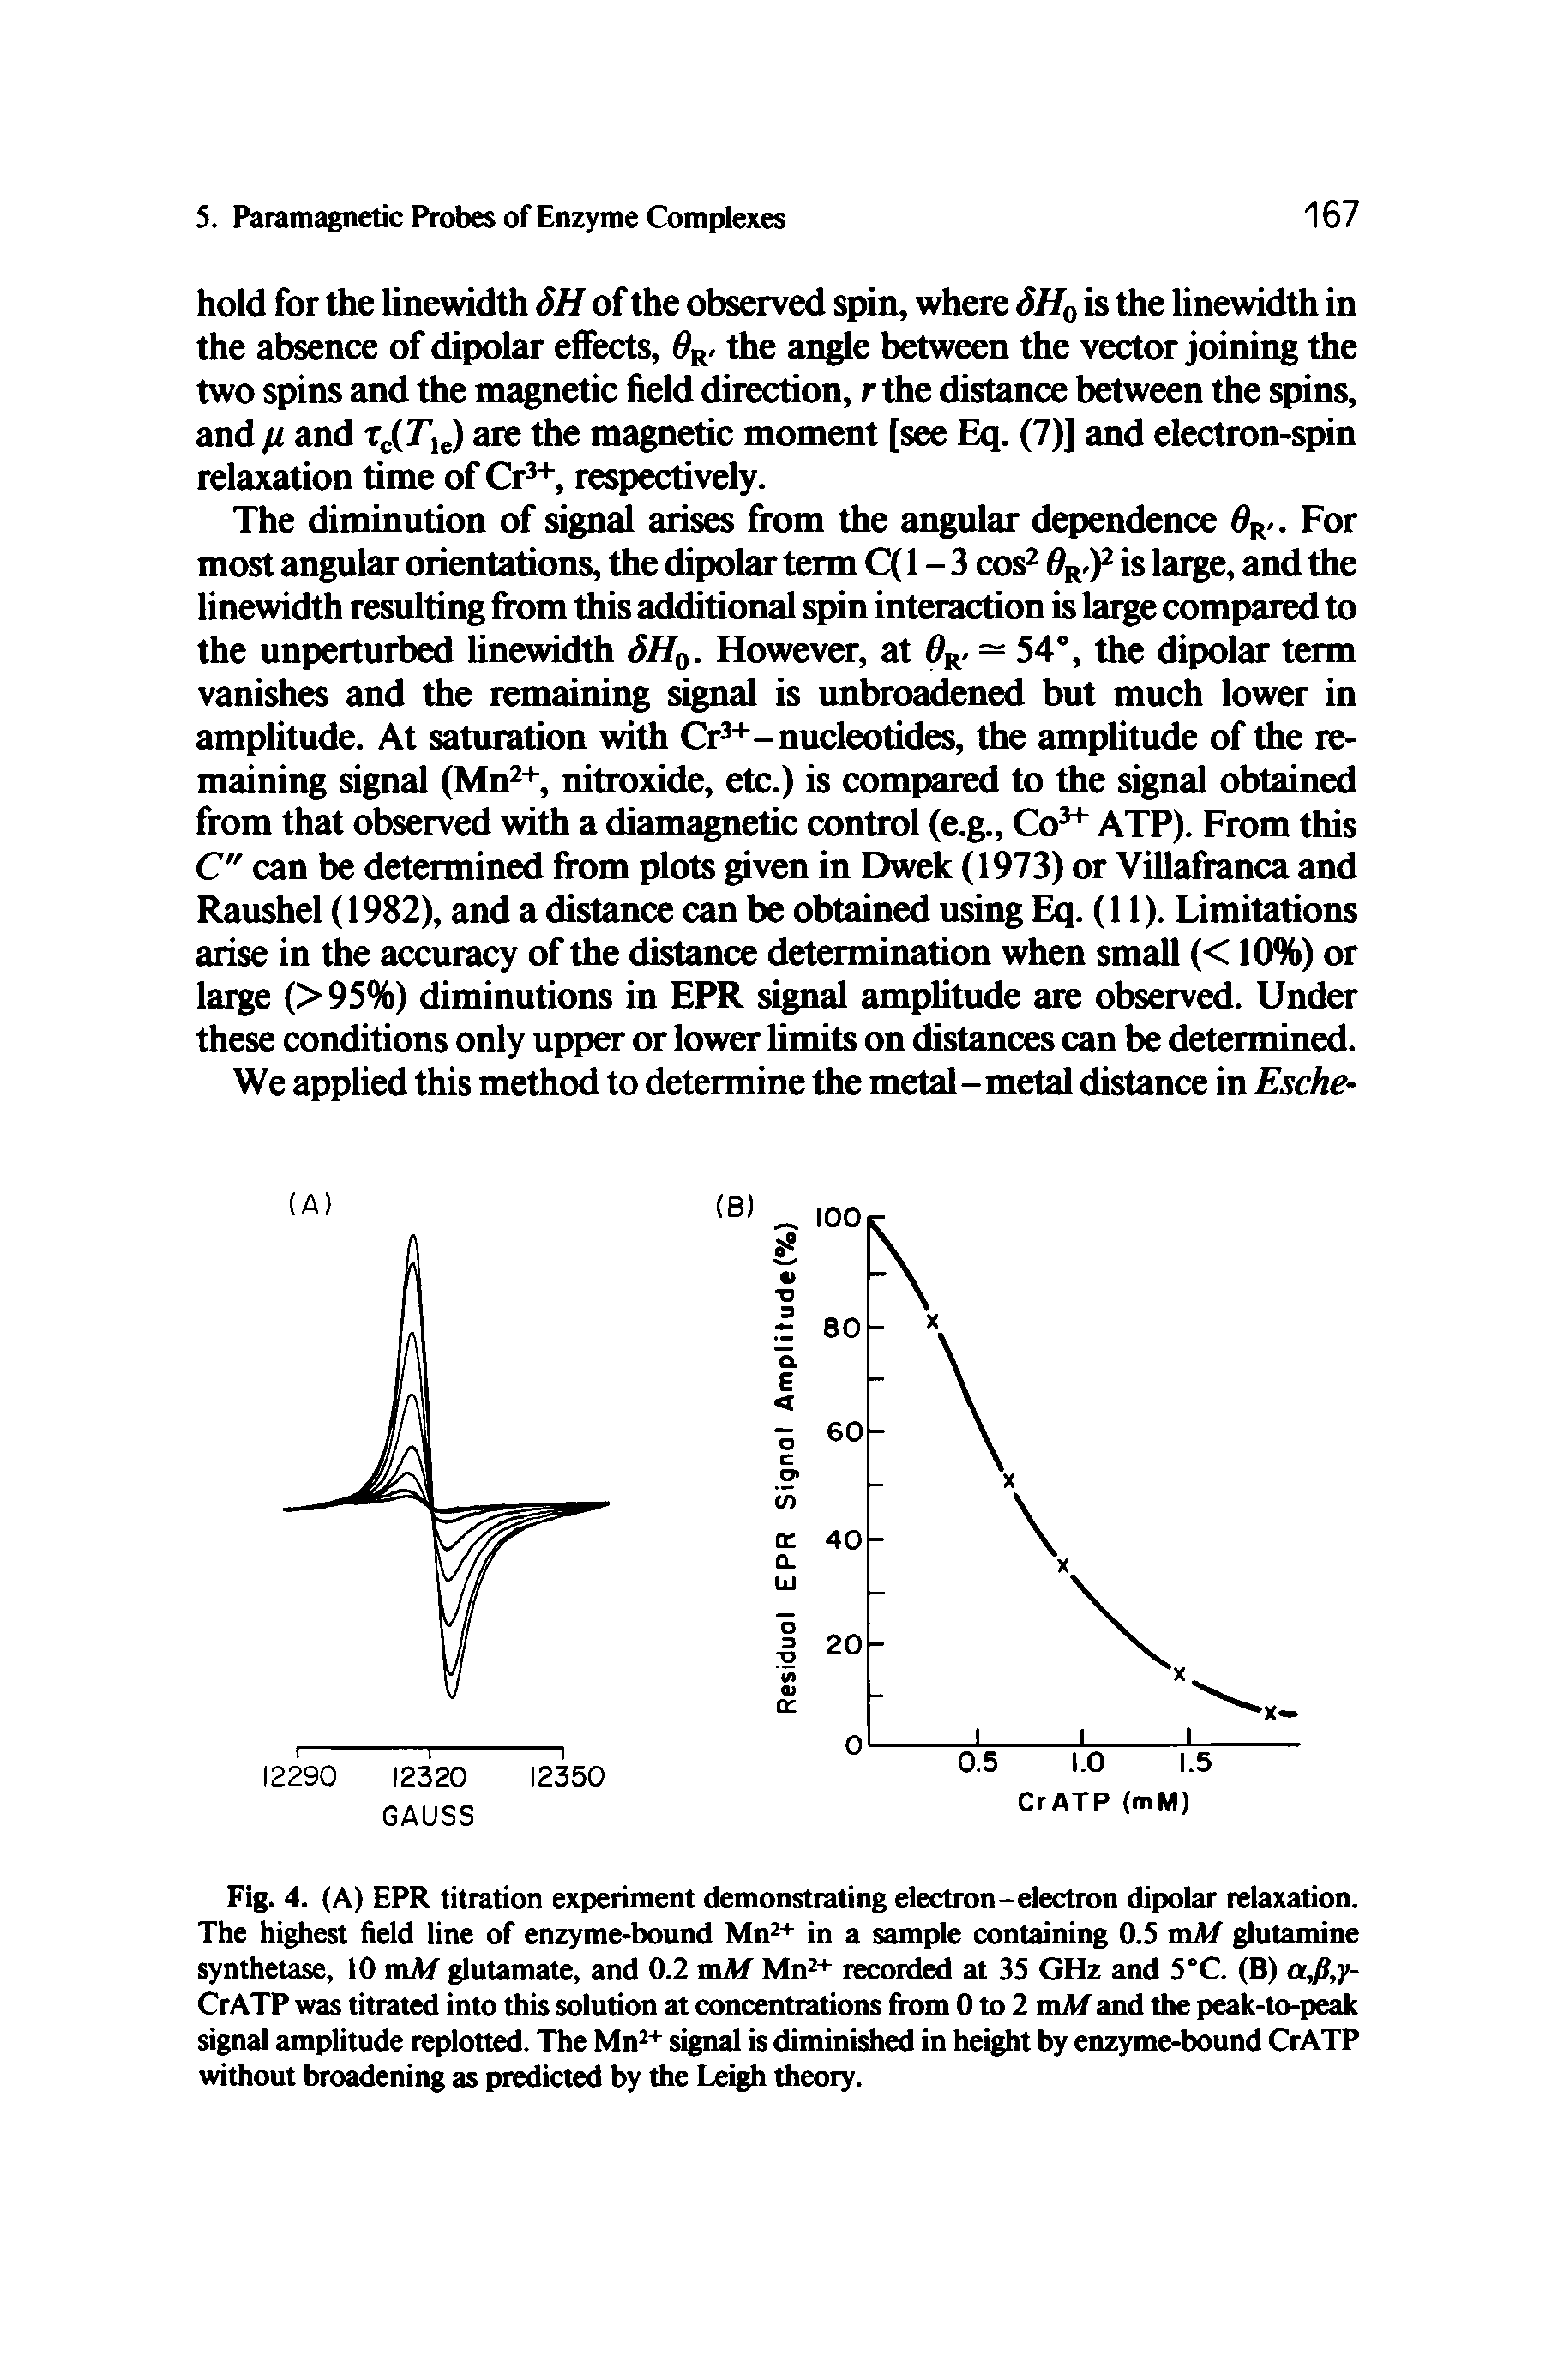 Fig. 4. (A) EPR titration experiment demonstrating electron-electron dipolar relaxation. The highest field line of enzyme-bound Mn - in a sample containing O.S mM glutamine synthetase, 10 mM glutamate, and 0.2 mAf Mn + recorded at 35 GHz and 3°C. (B) a, y-CrATP was titrated into this solution at concentrations from 0 to 2 mM and the peak-to-peak signal amplitude replotted. The Mn signal is diminished in height by enzyme-bound CrATP without broadening as predicted by the Leigh theory.